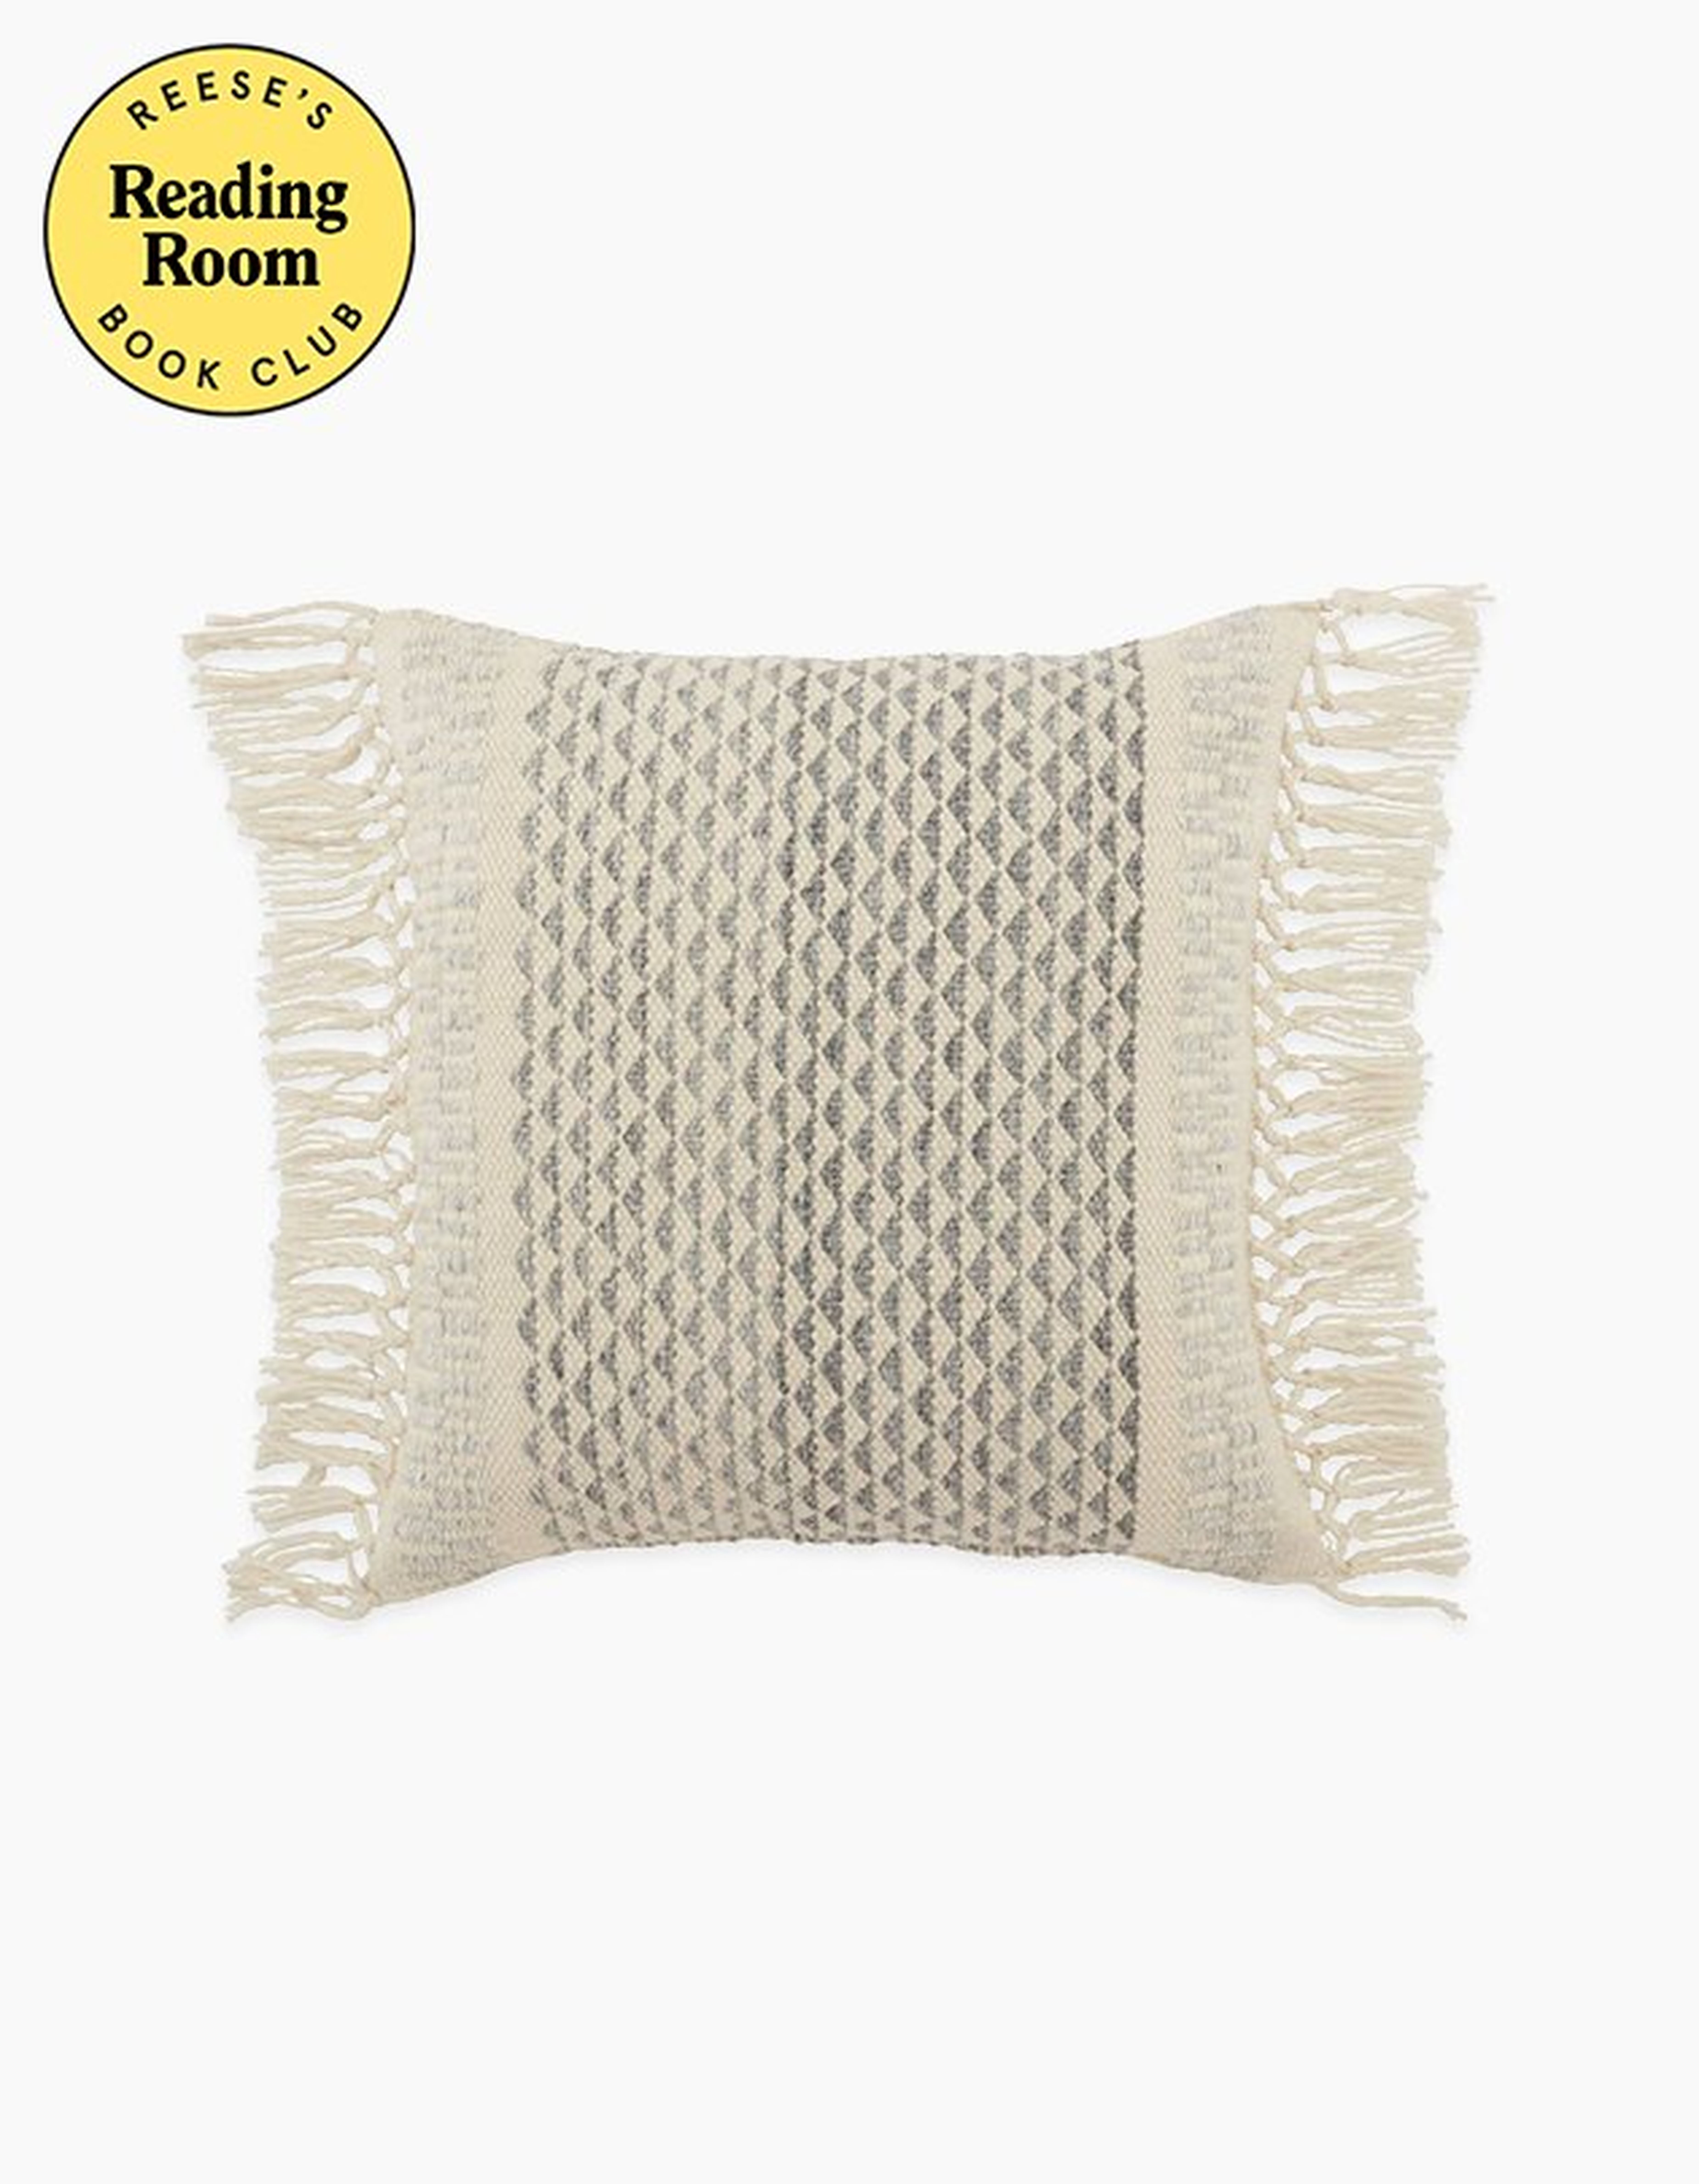 Fringe Pillow - Flint 18" - Reese's Book Club x Havenly